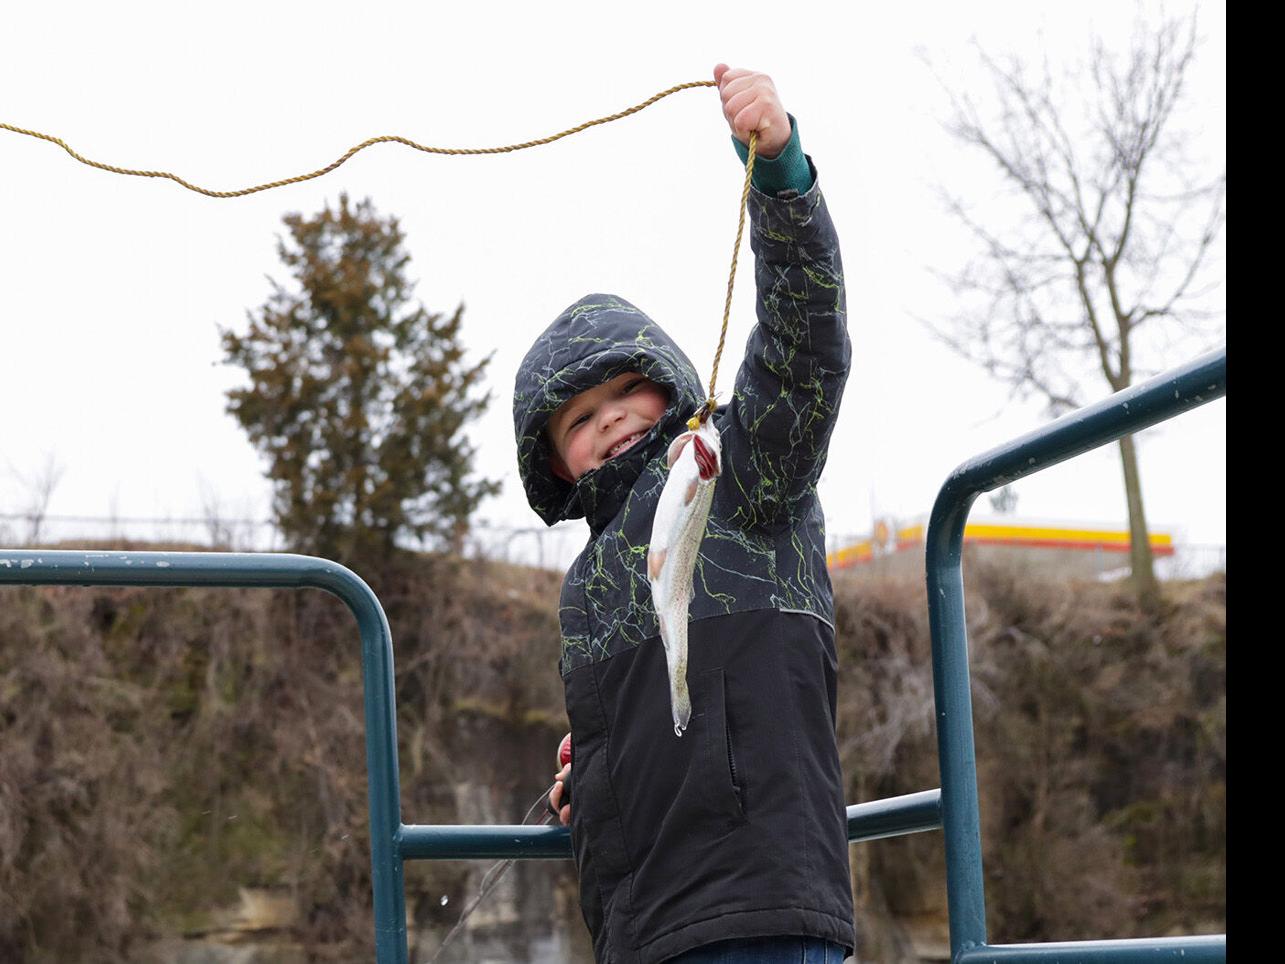 Kids' Fishing Day: A Father's Day Weekend tradition - The Troy Messenger